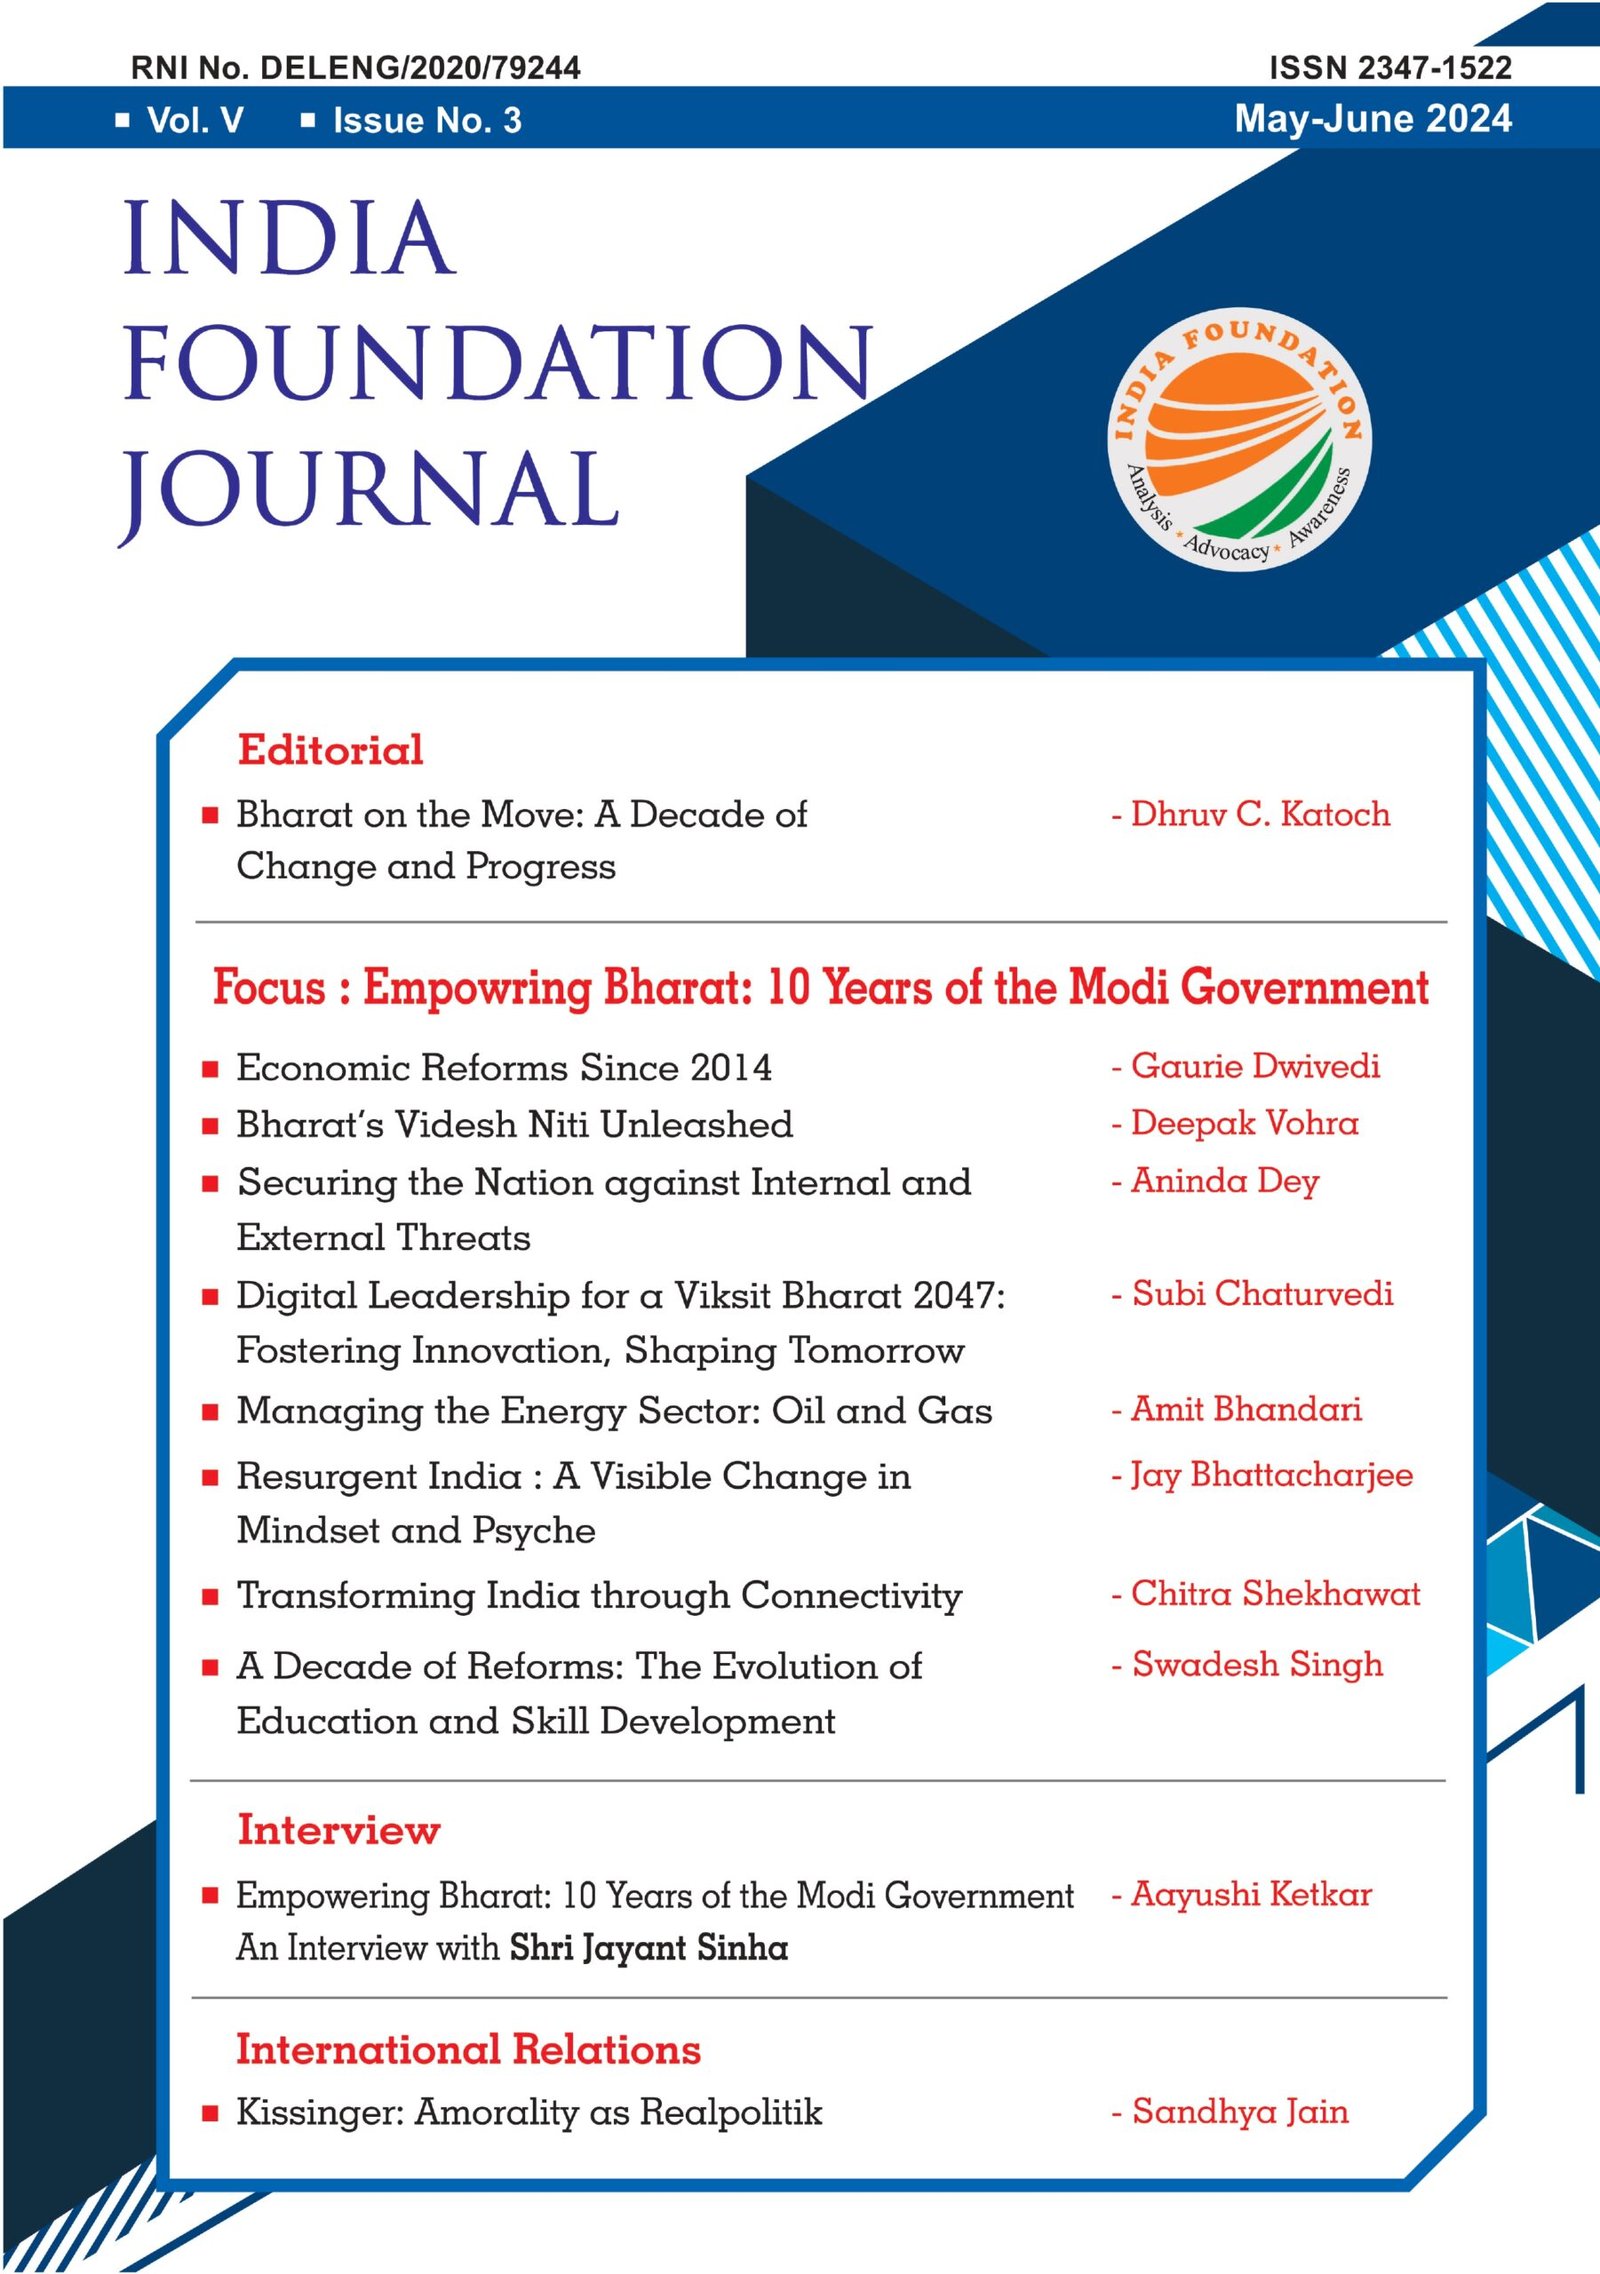 India Foundation Journal: May-June 2024